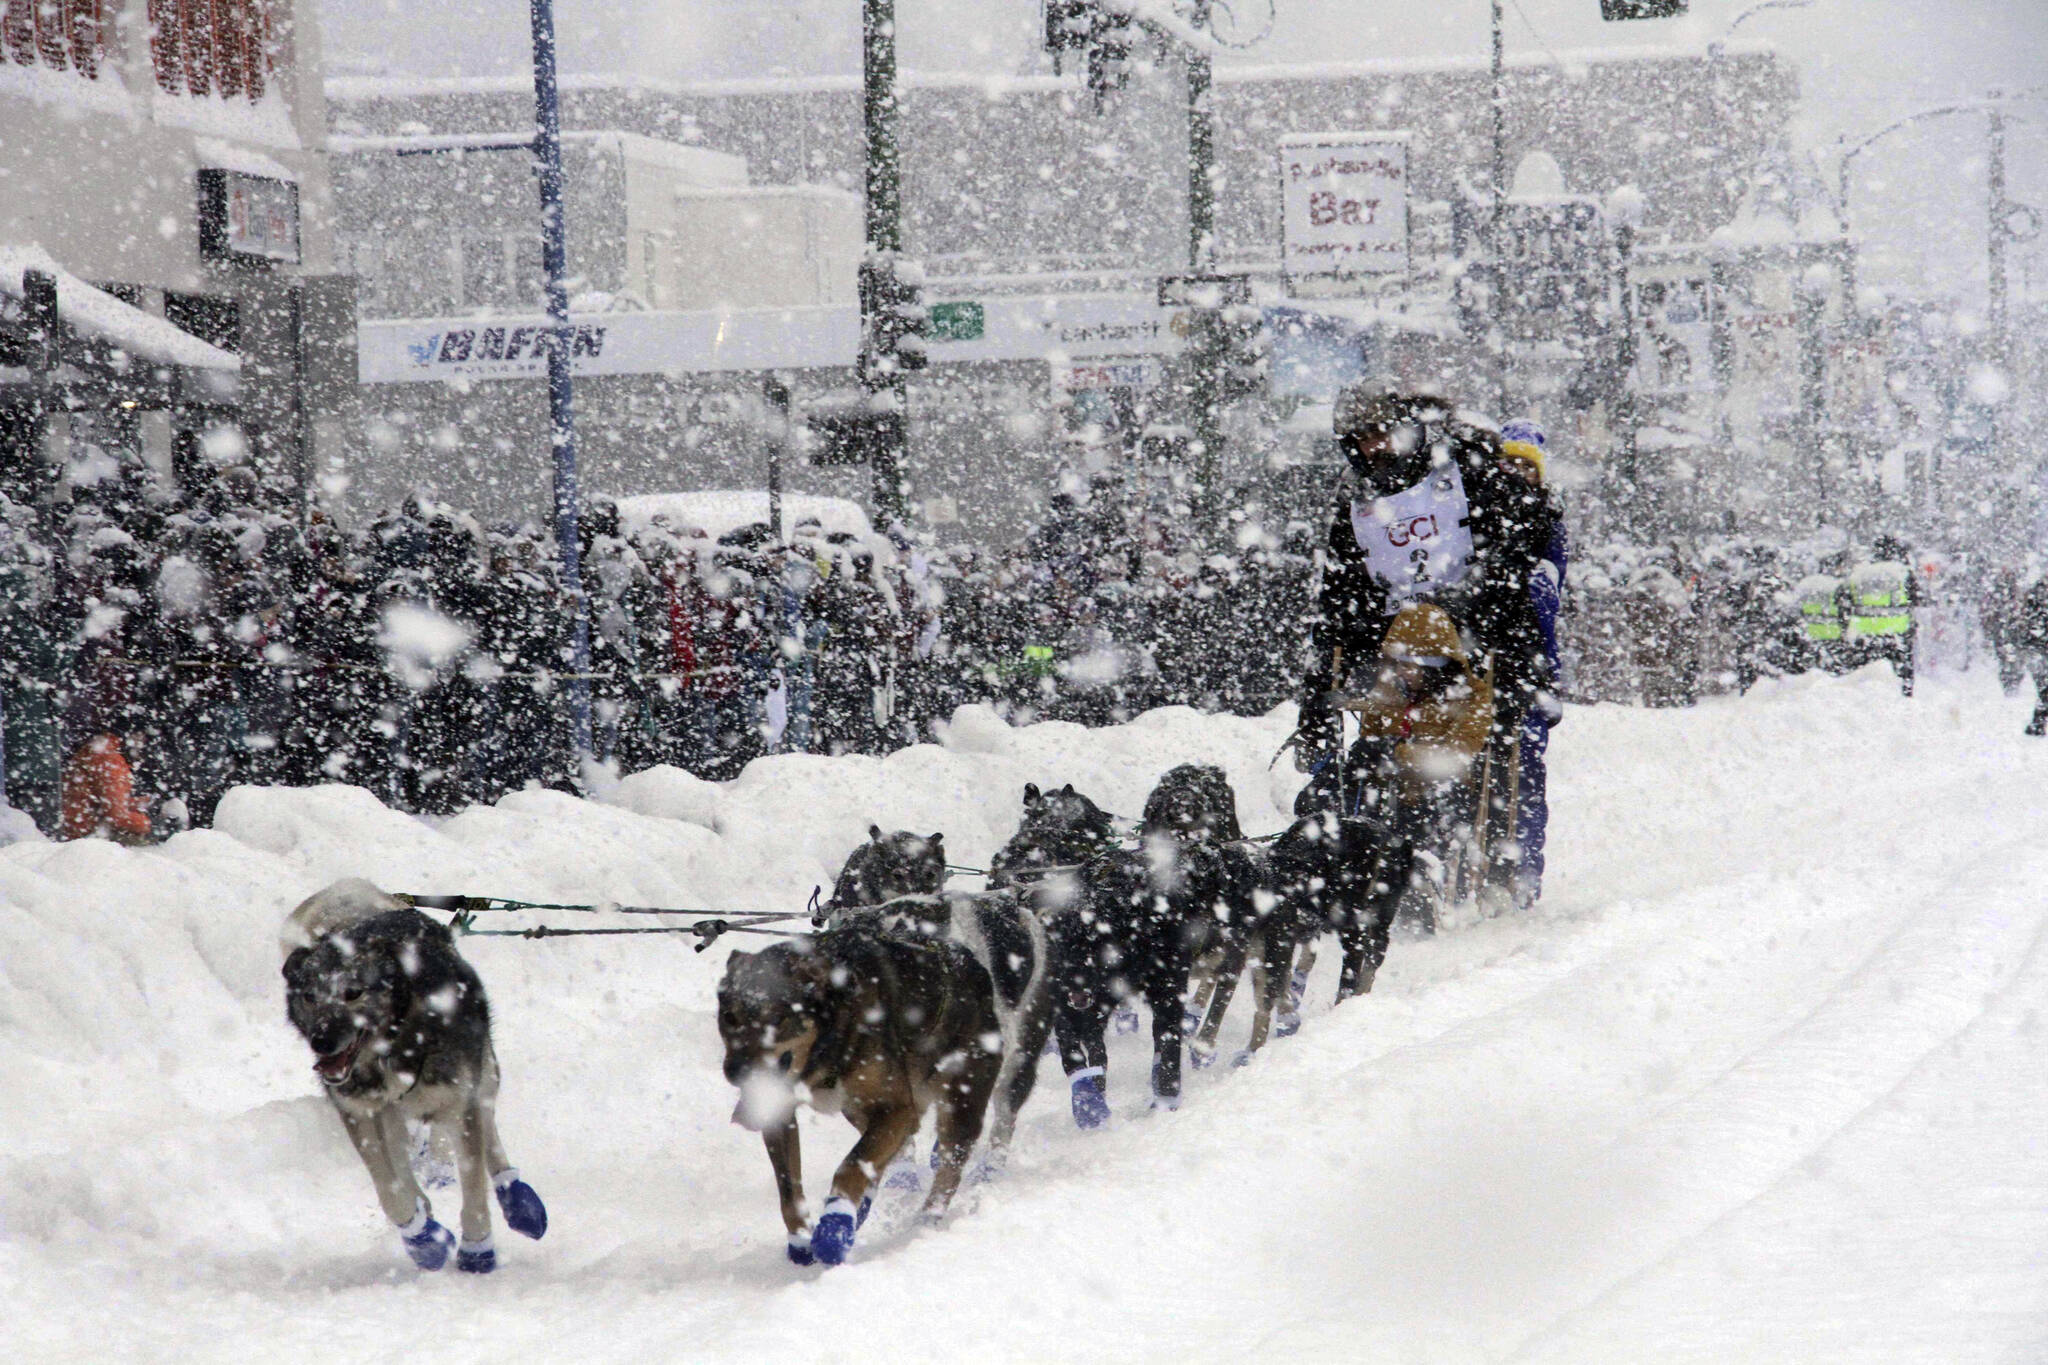 Sean Williams, a rookie musher from Chugiak, Alaska, takes his sled dogs through a snowstorm in downtown Anchorage, Alaska, on Saturday, March 5, 2022, during the ceremonial start of the Iditarod Trail Sled Dog Race. The competitive start of the nearly 1,000-mile race will be held March 6, 2022, in Willow, Alaska, with the winner expected in the Bering Sea coastal town of Nome about nine days later. (AP Photo / Mark Thiessen)